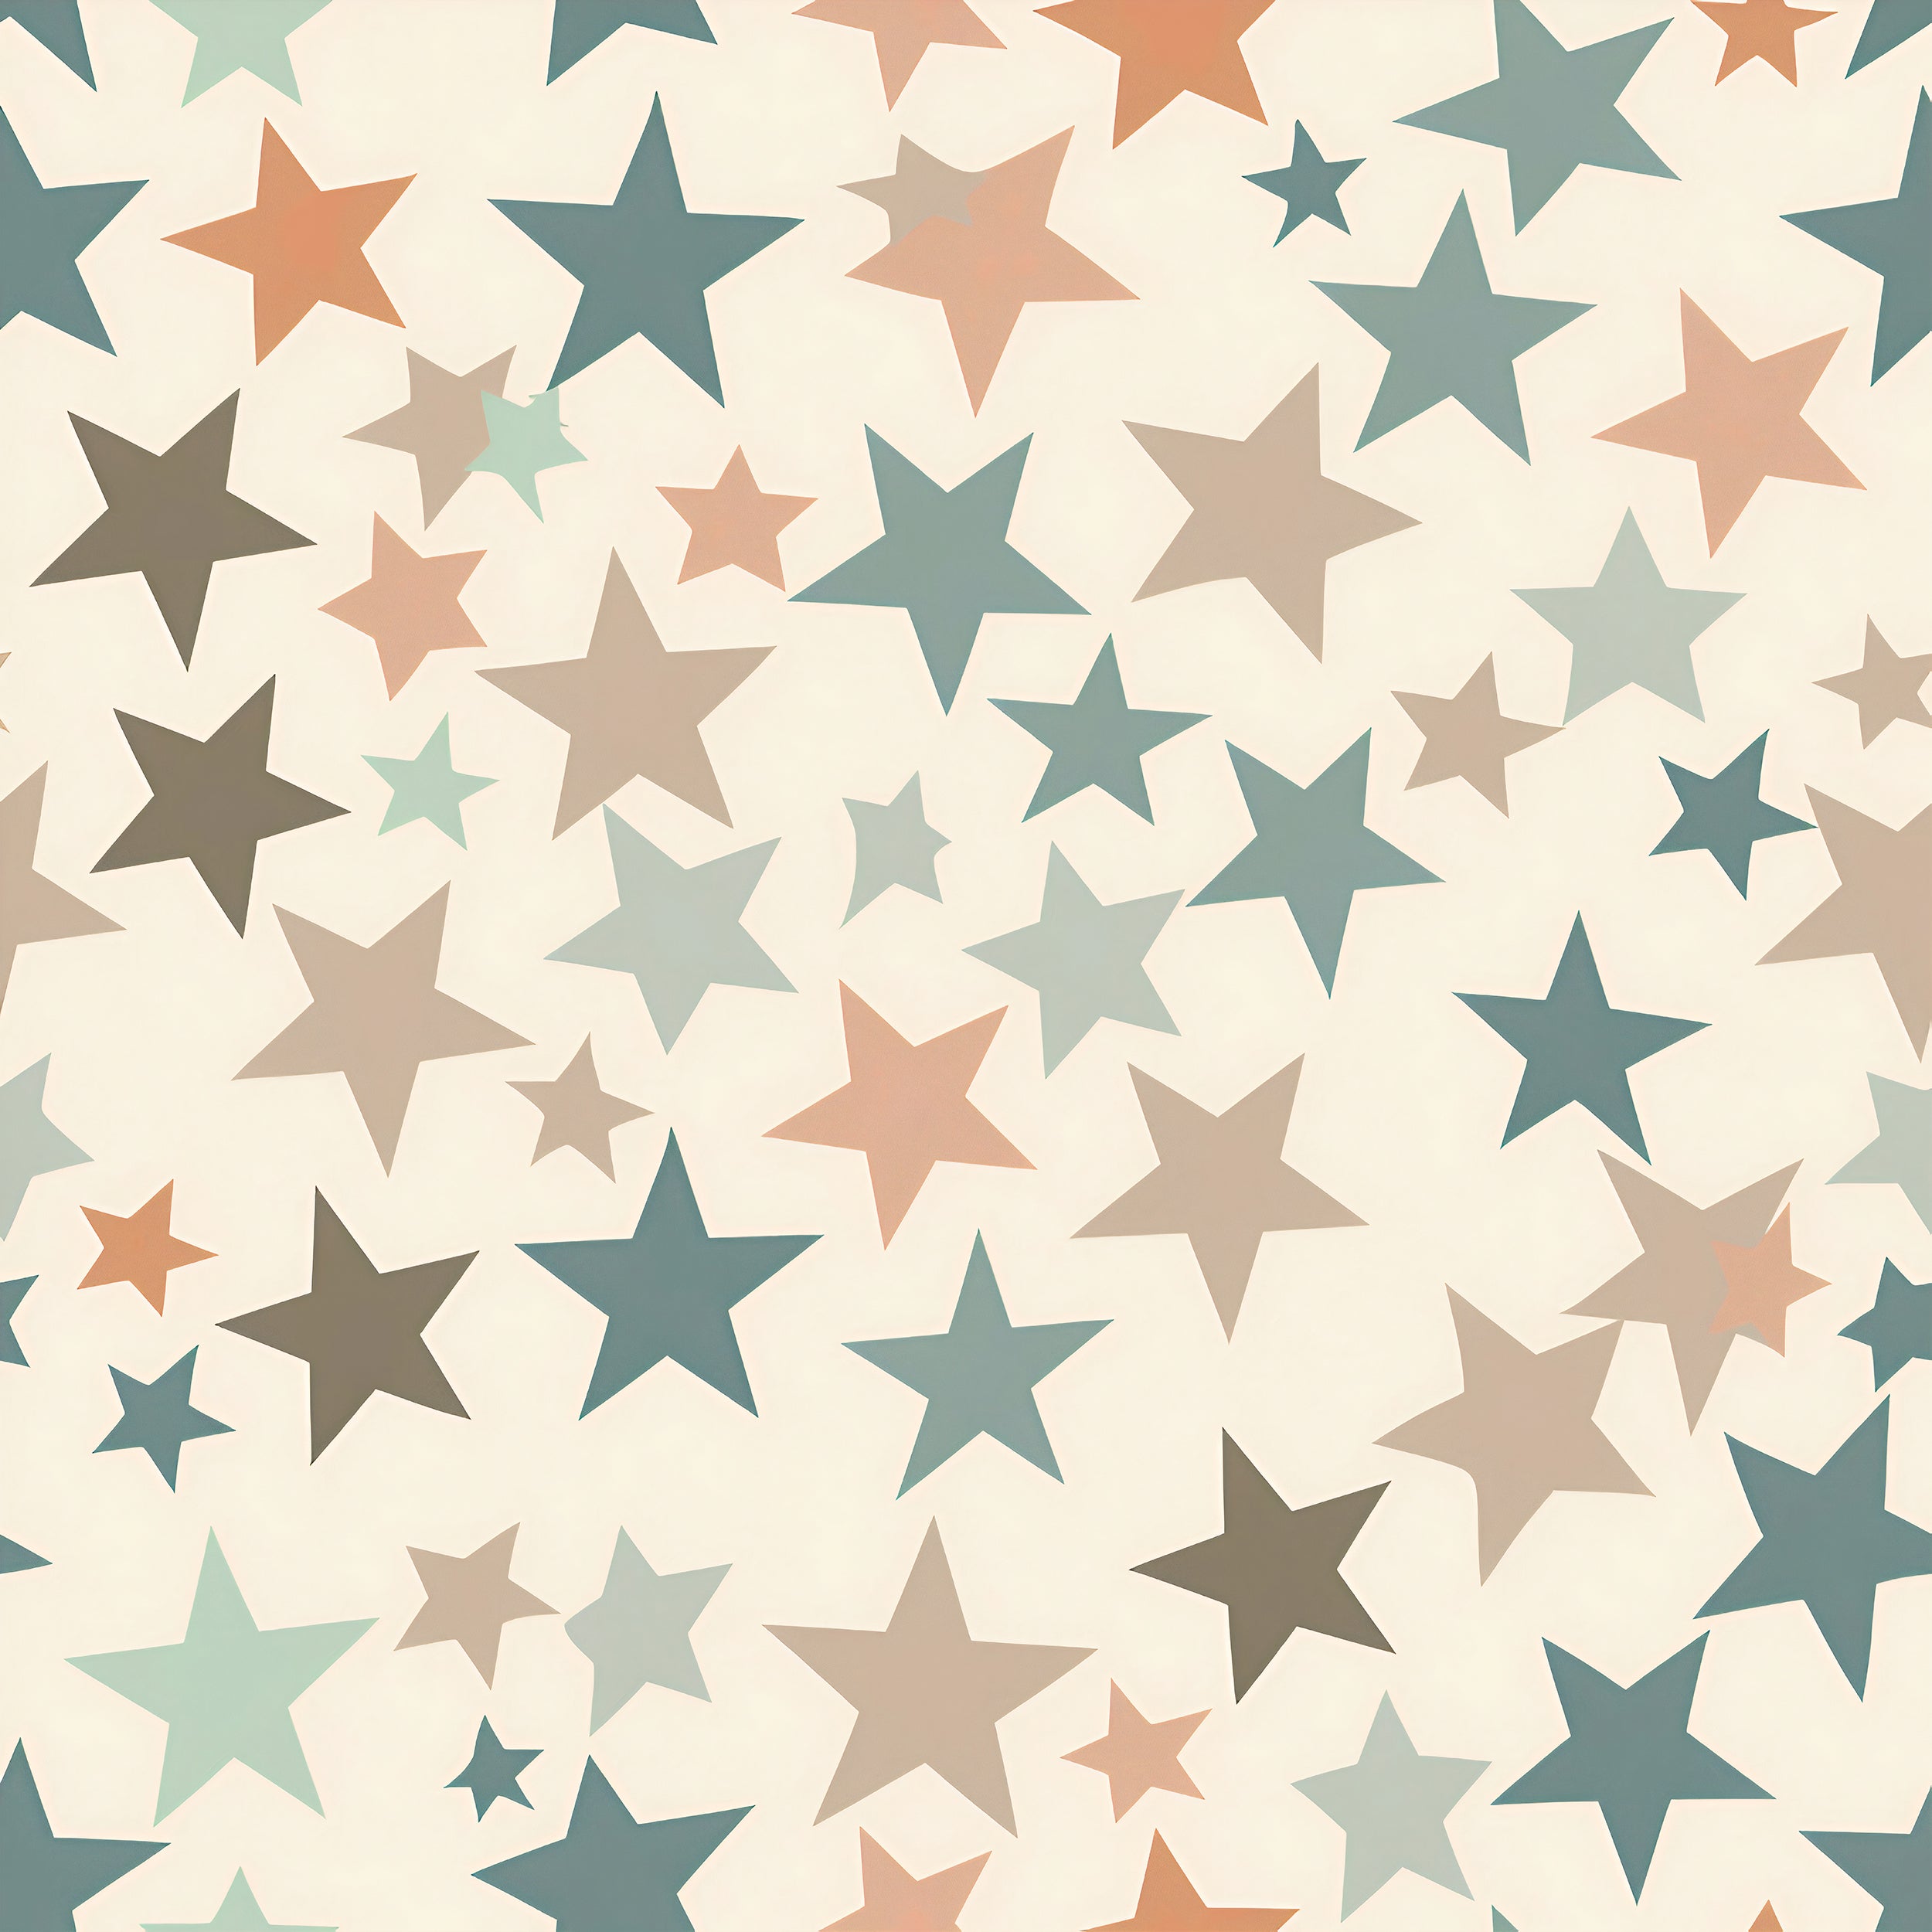 Boho Stars Wallpaper, Colorful Starry Wallpaper, Peel and Stick Pastel Colors Nursery Wall Decor, Removable Stars